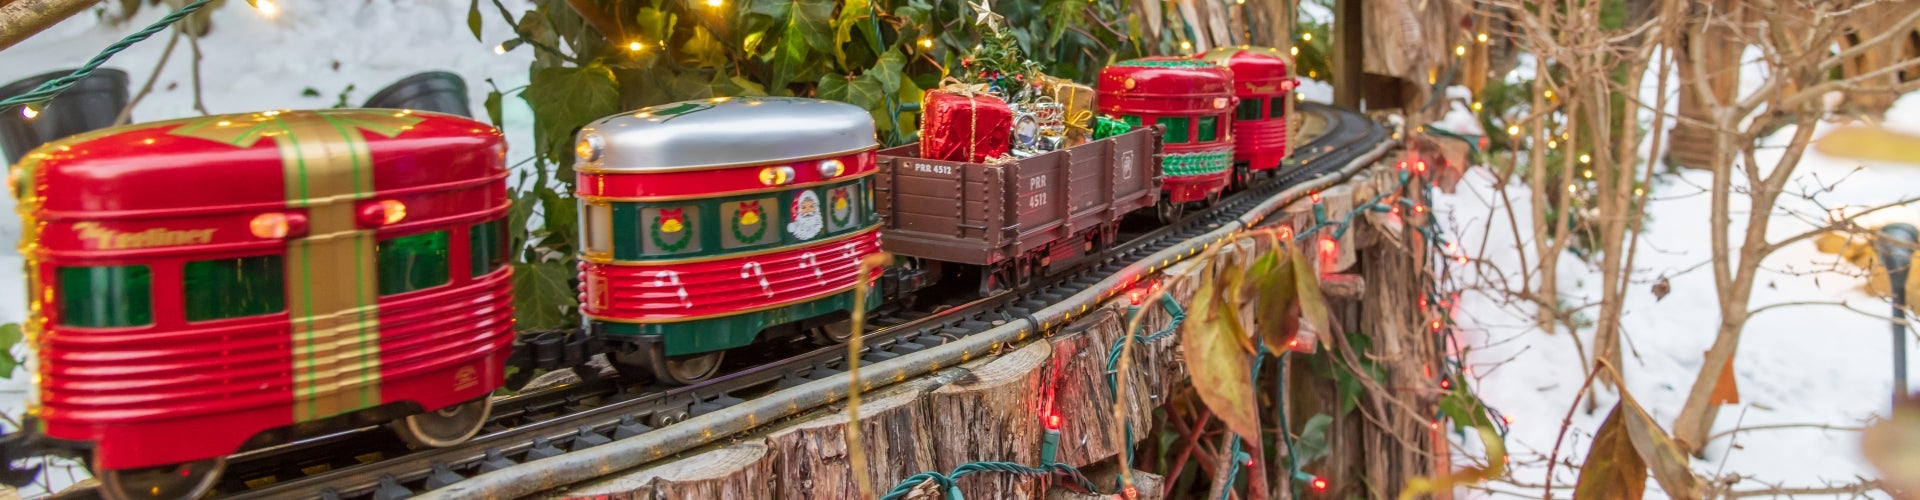 An outdoor miniature train display decorated for the holidays on a snowy winter day